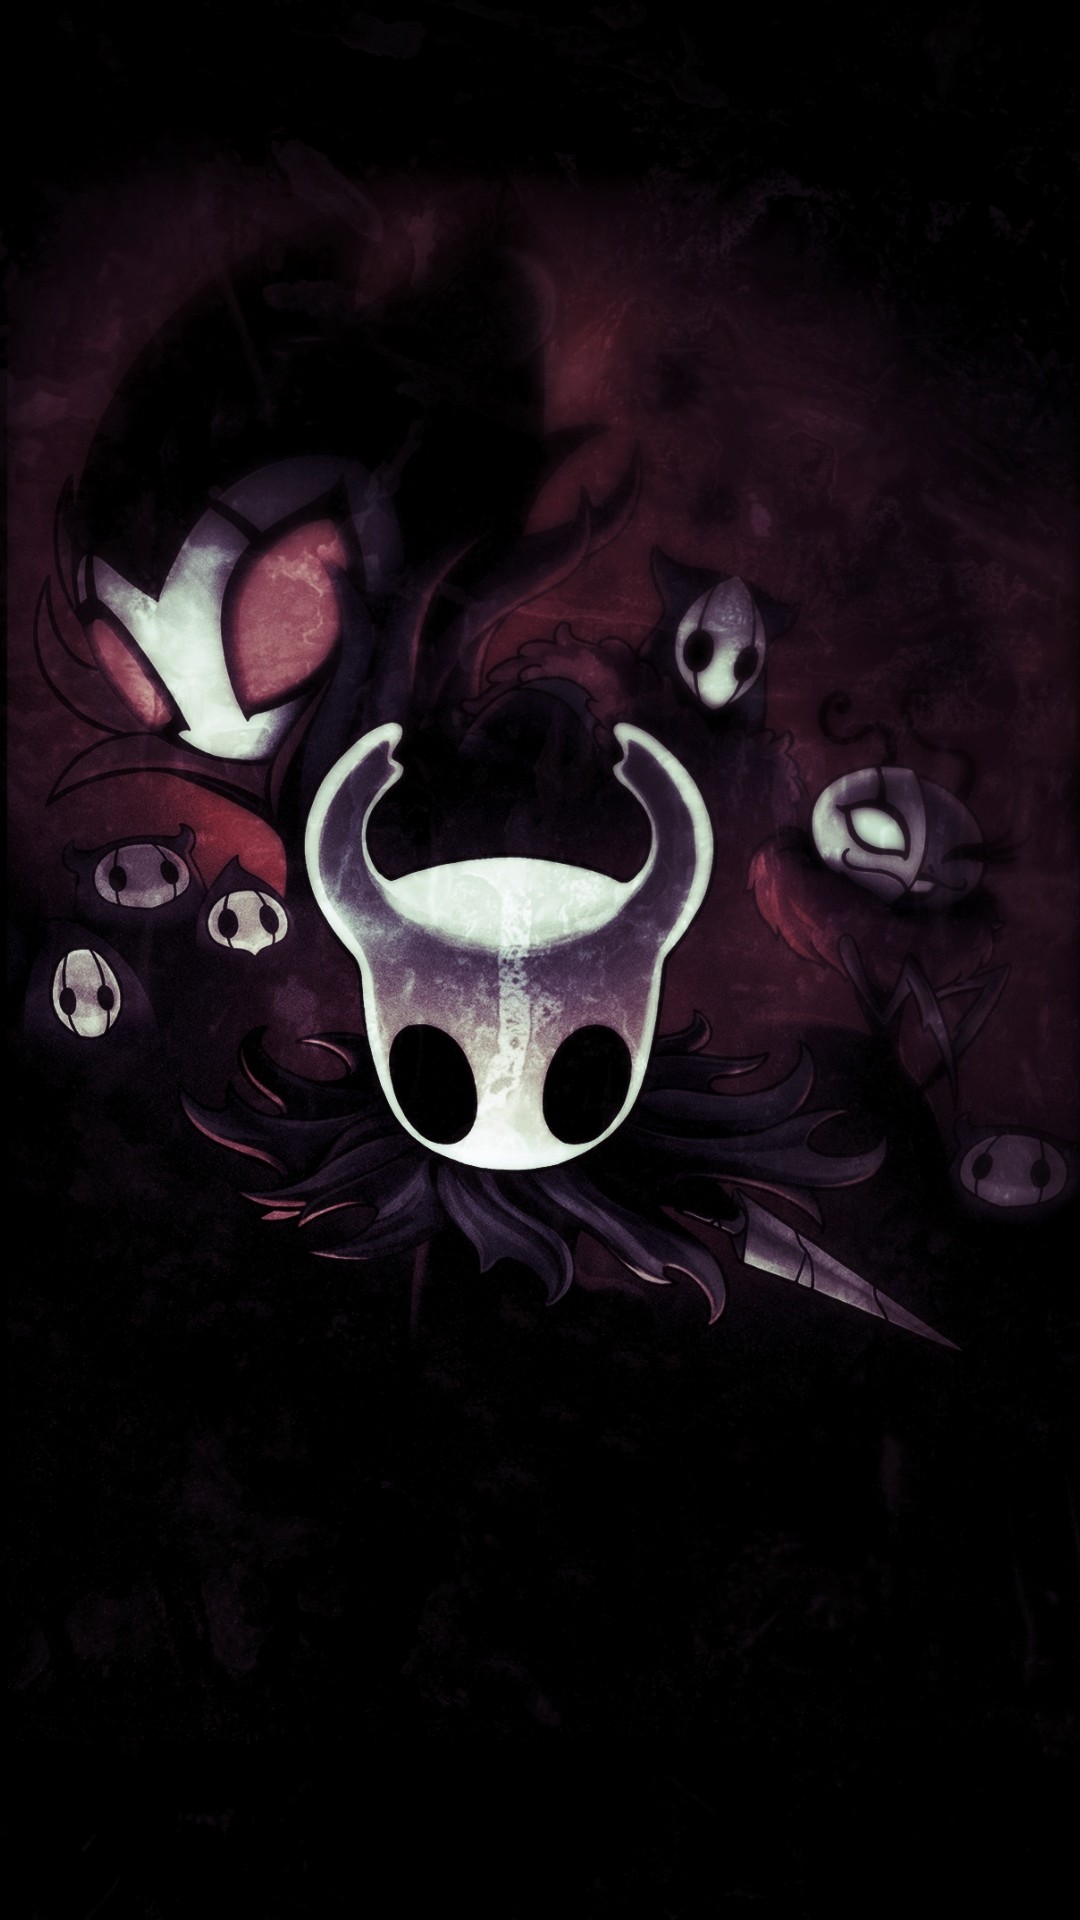 Hollow Knight iPhone Wallpaper With high-resolution 1080X1920 pixel. You can set as wallpaper for Apple iPhone X, XS Max, XR, 8, 7, 6, SE, iPad. Enjoy and share your favorite HD wallpapers and background images